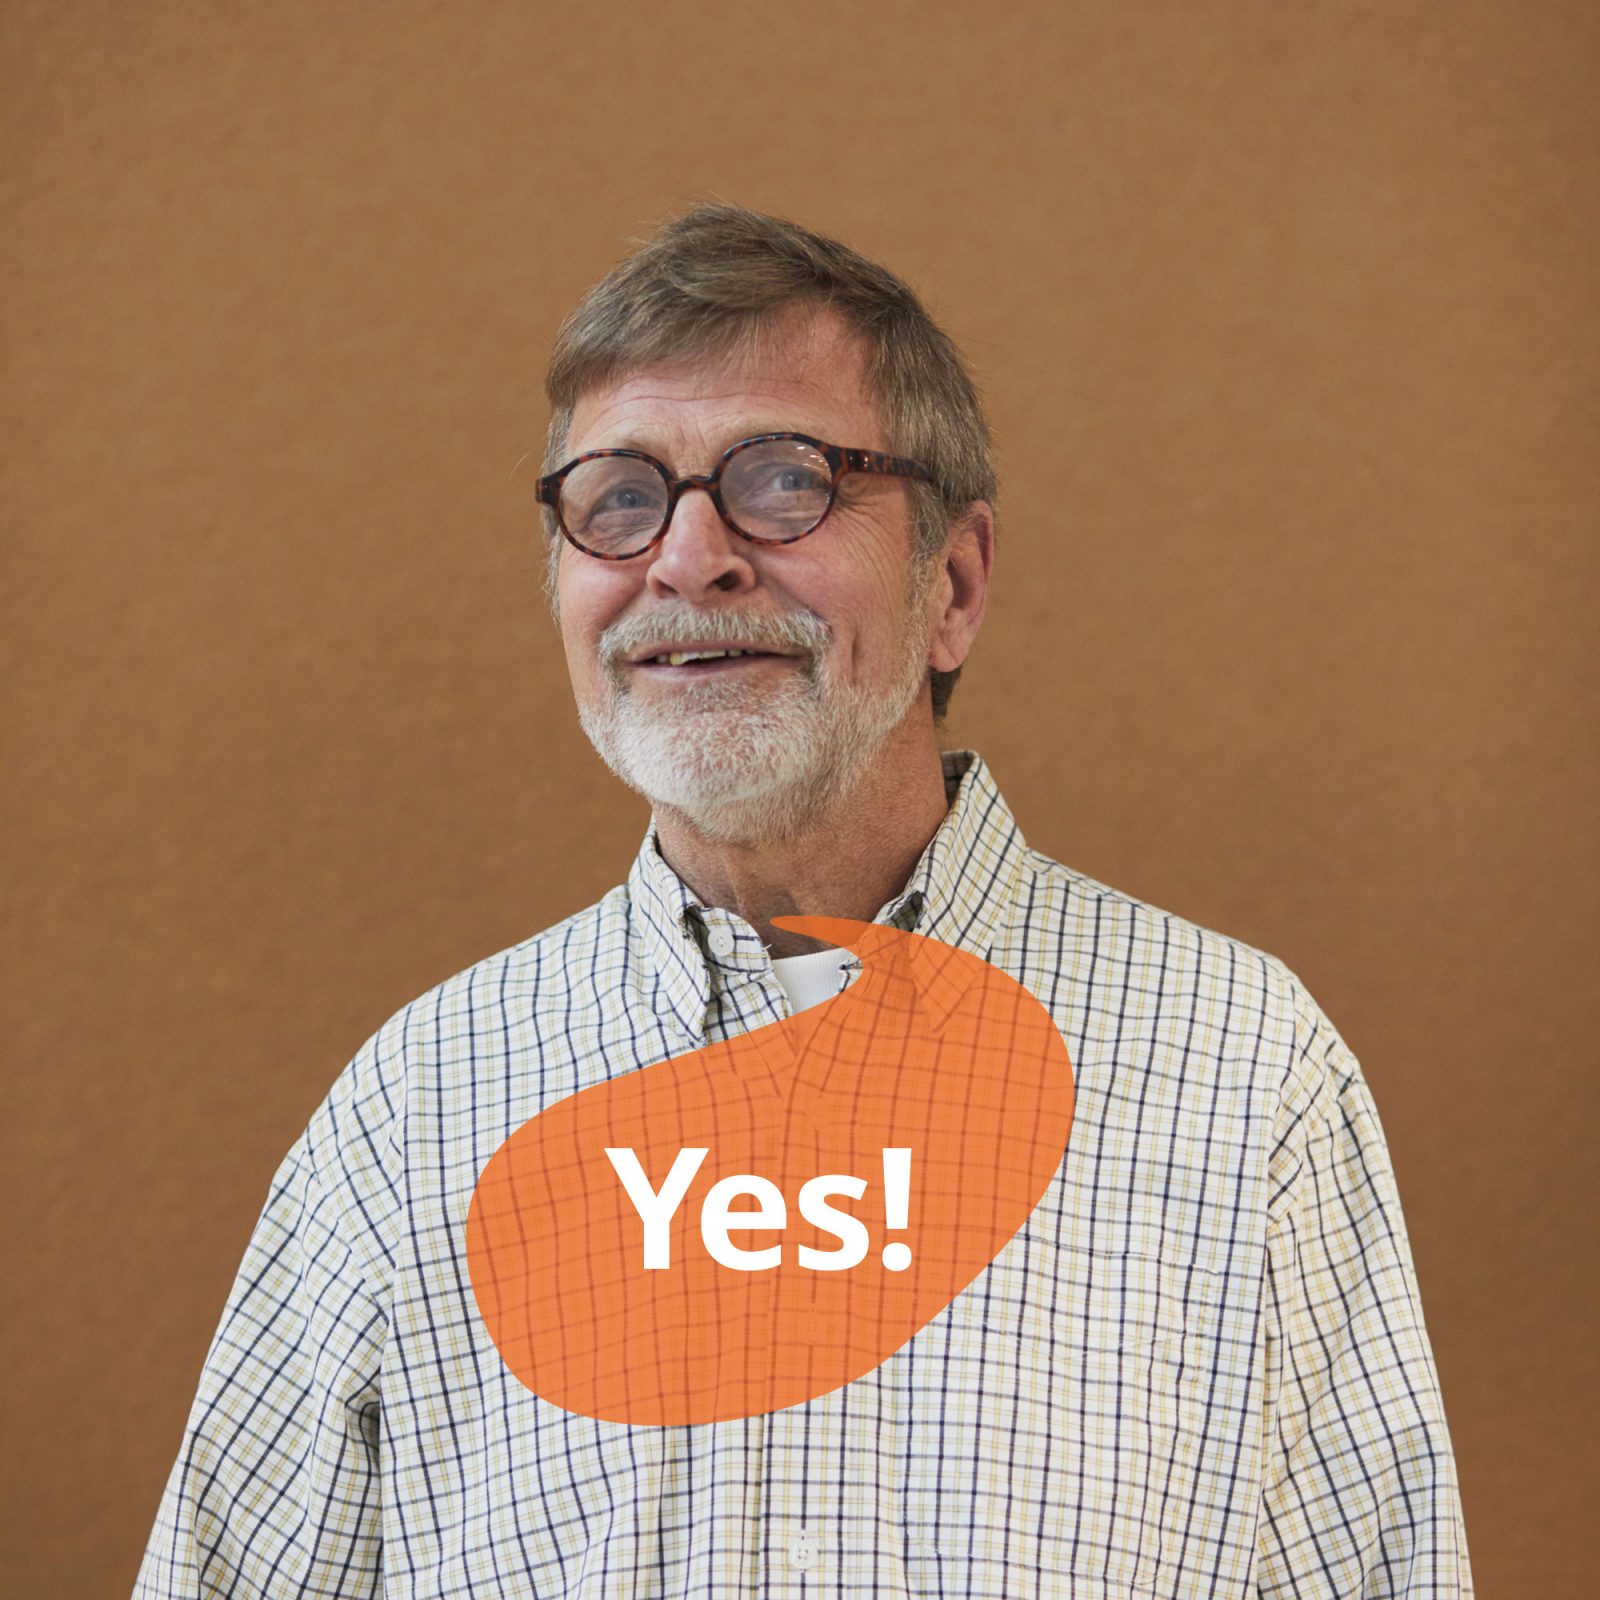 Grey-haired man in glasses and check shirt smiles and looks up. A speech bubble contains the text 'Yes'.